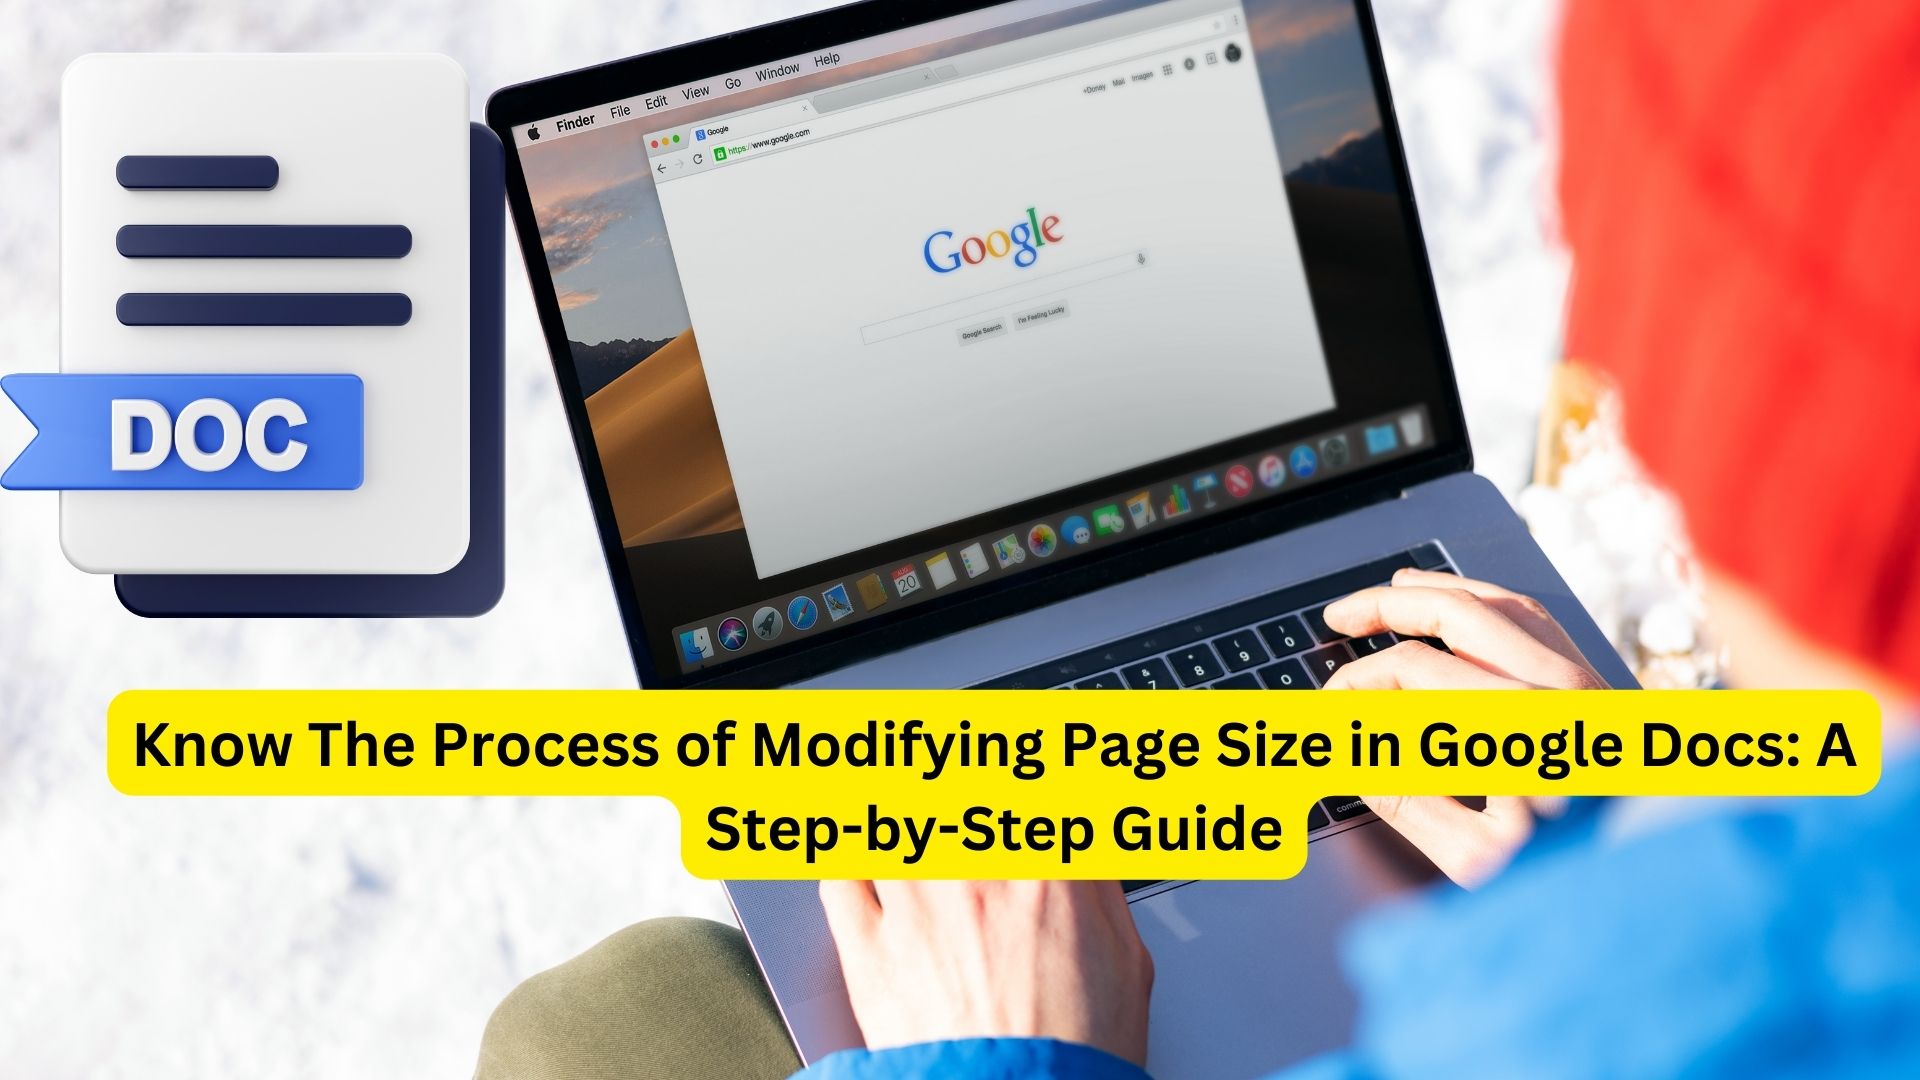 Know The Process of Modifying Page Size in Google Docs: A Step-by-Step Guide